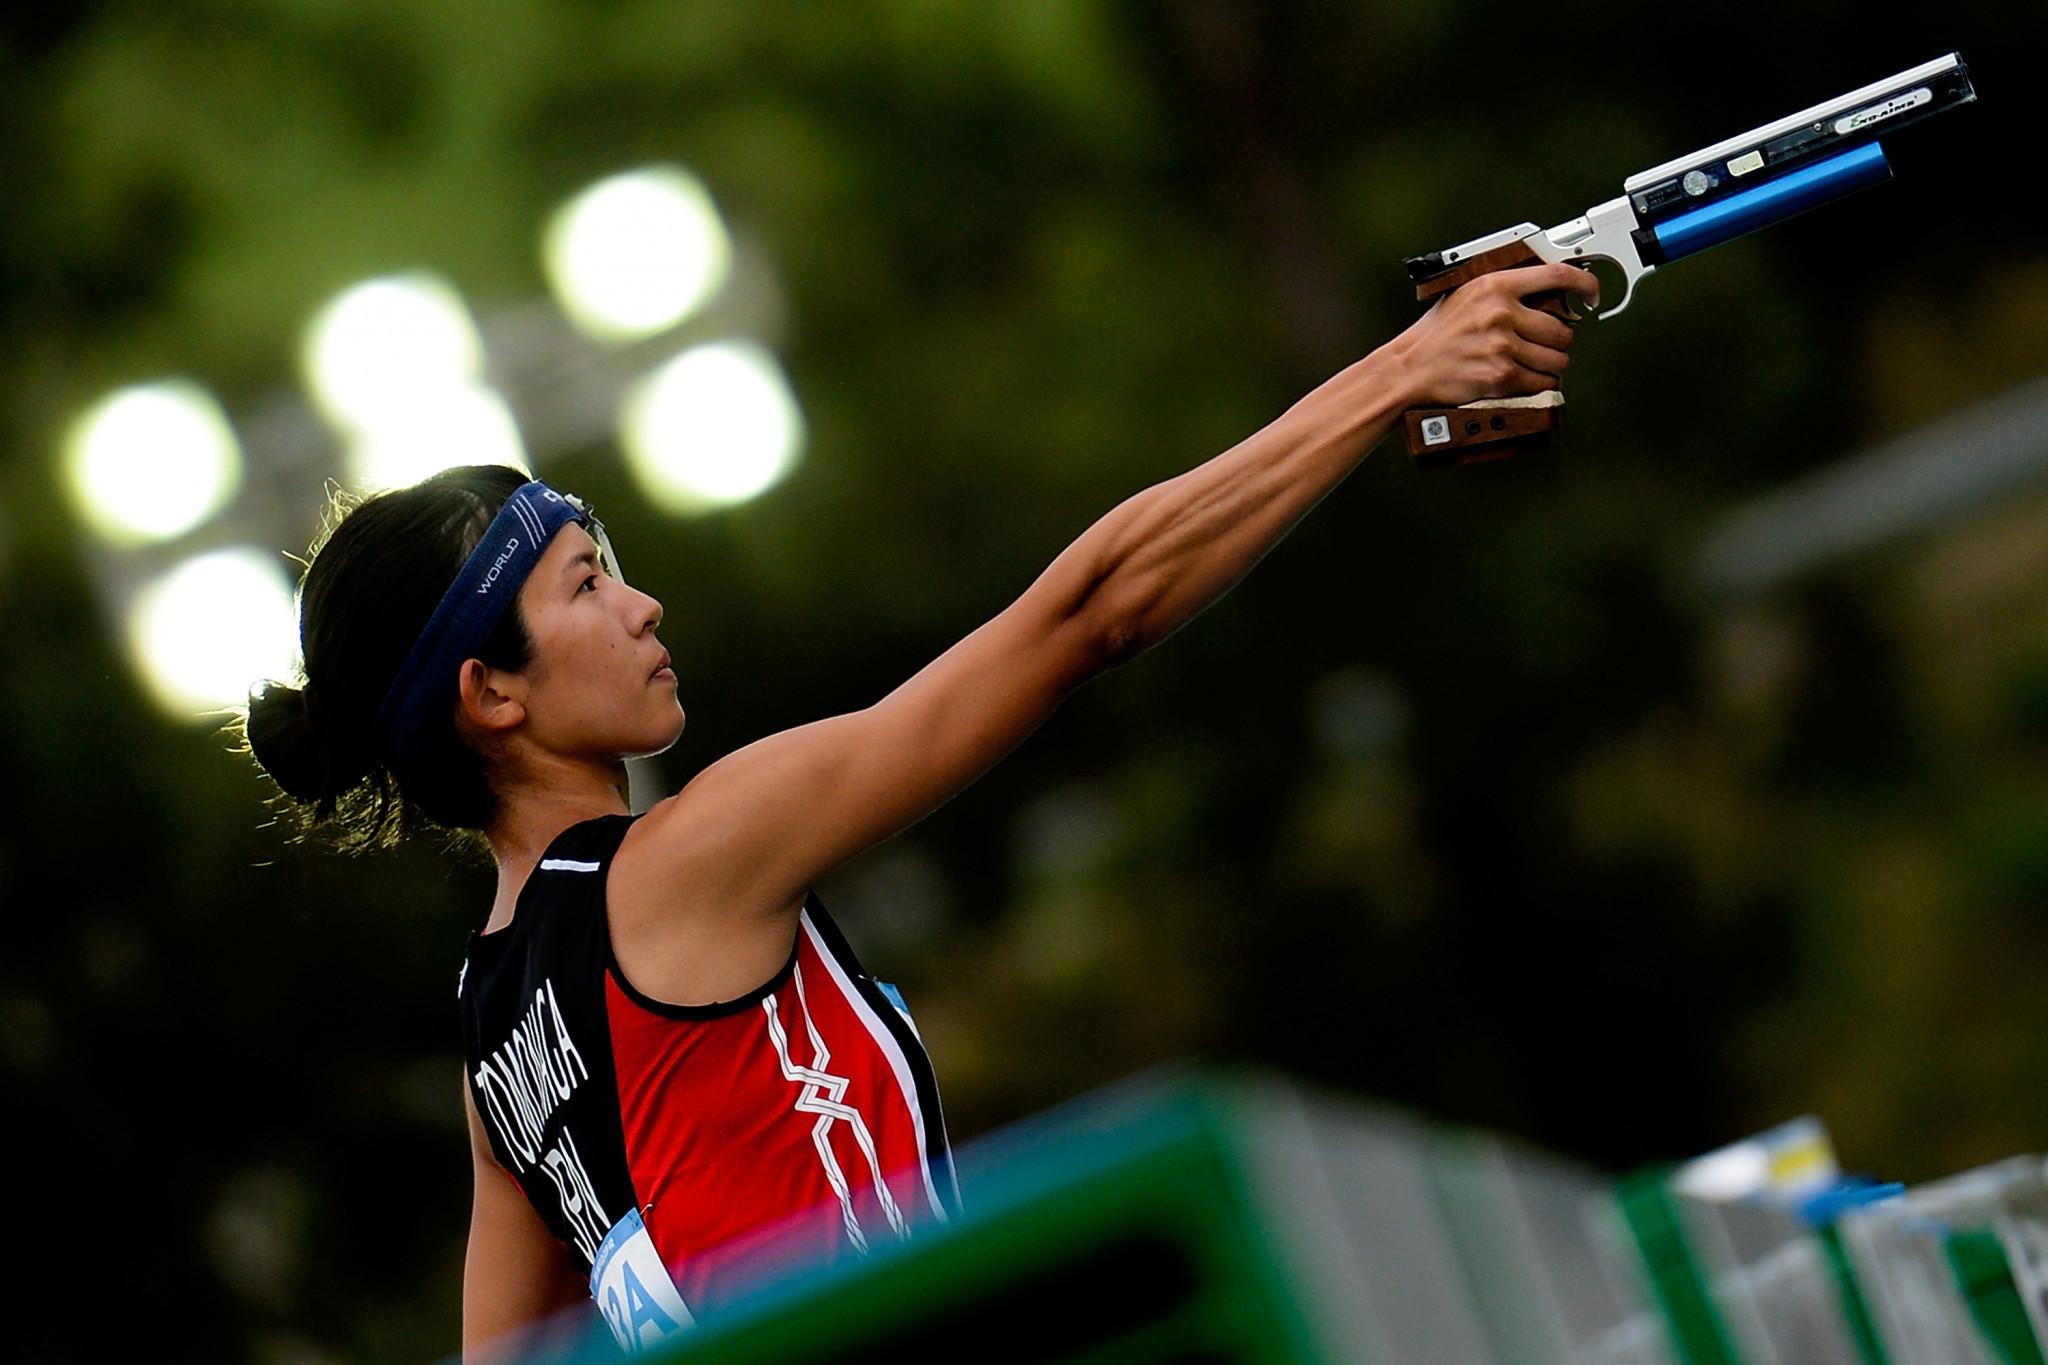 Natsumi Tomonaga of Japan headed qualifiers for Friday's women's final at the UIPM World Cup in Sofia ©Getty Images